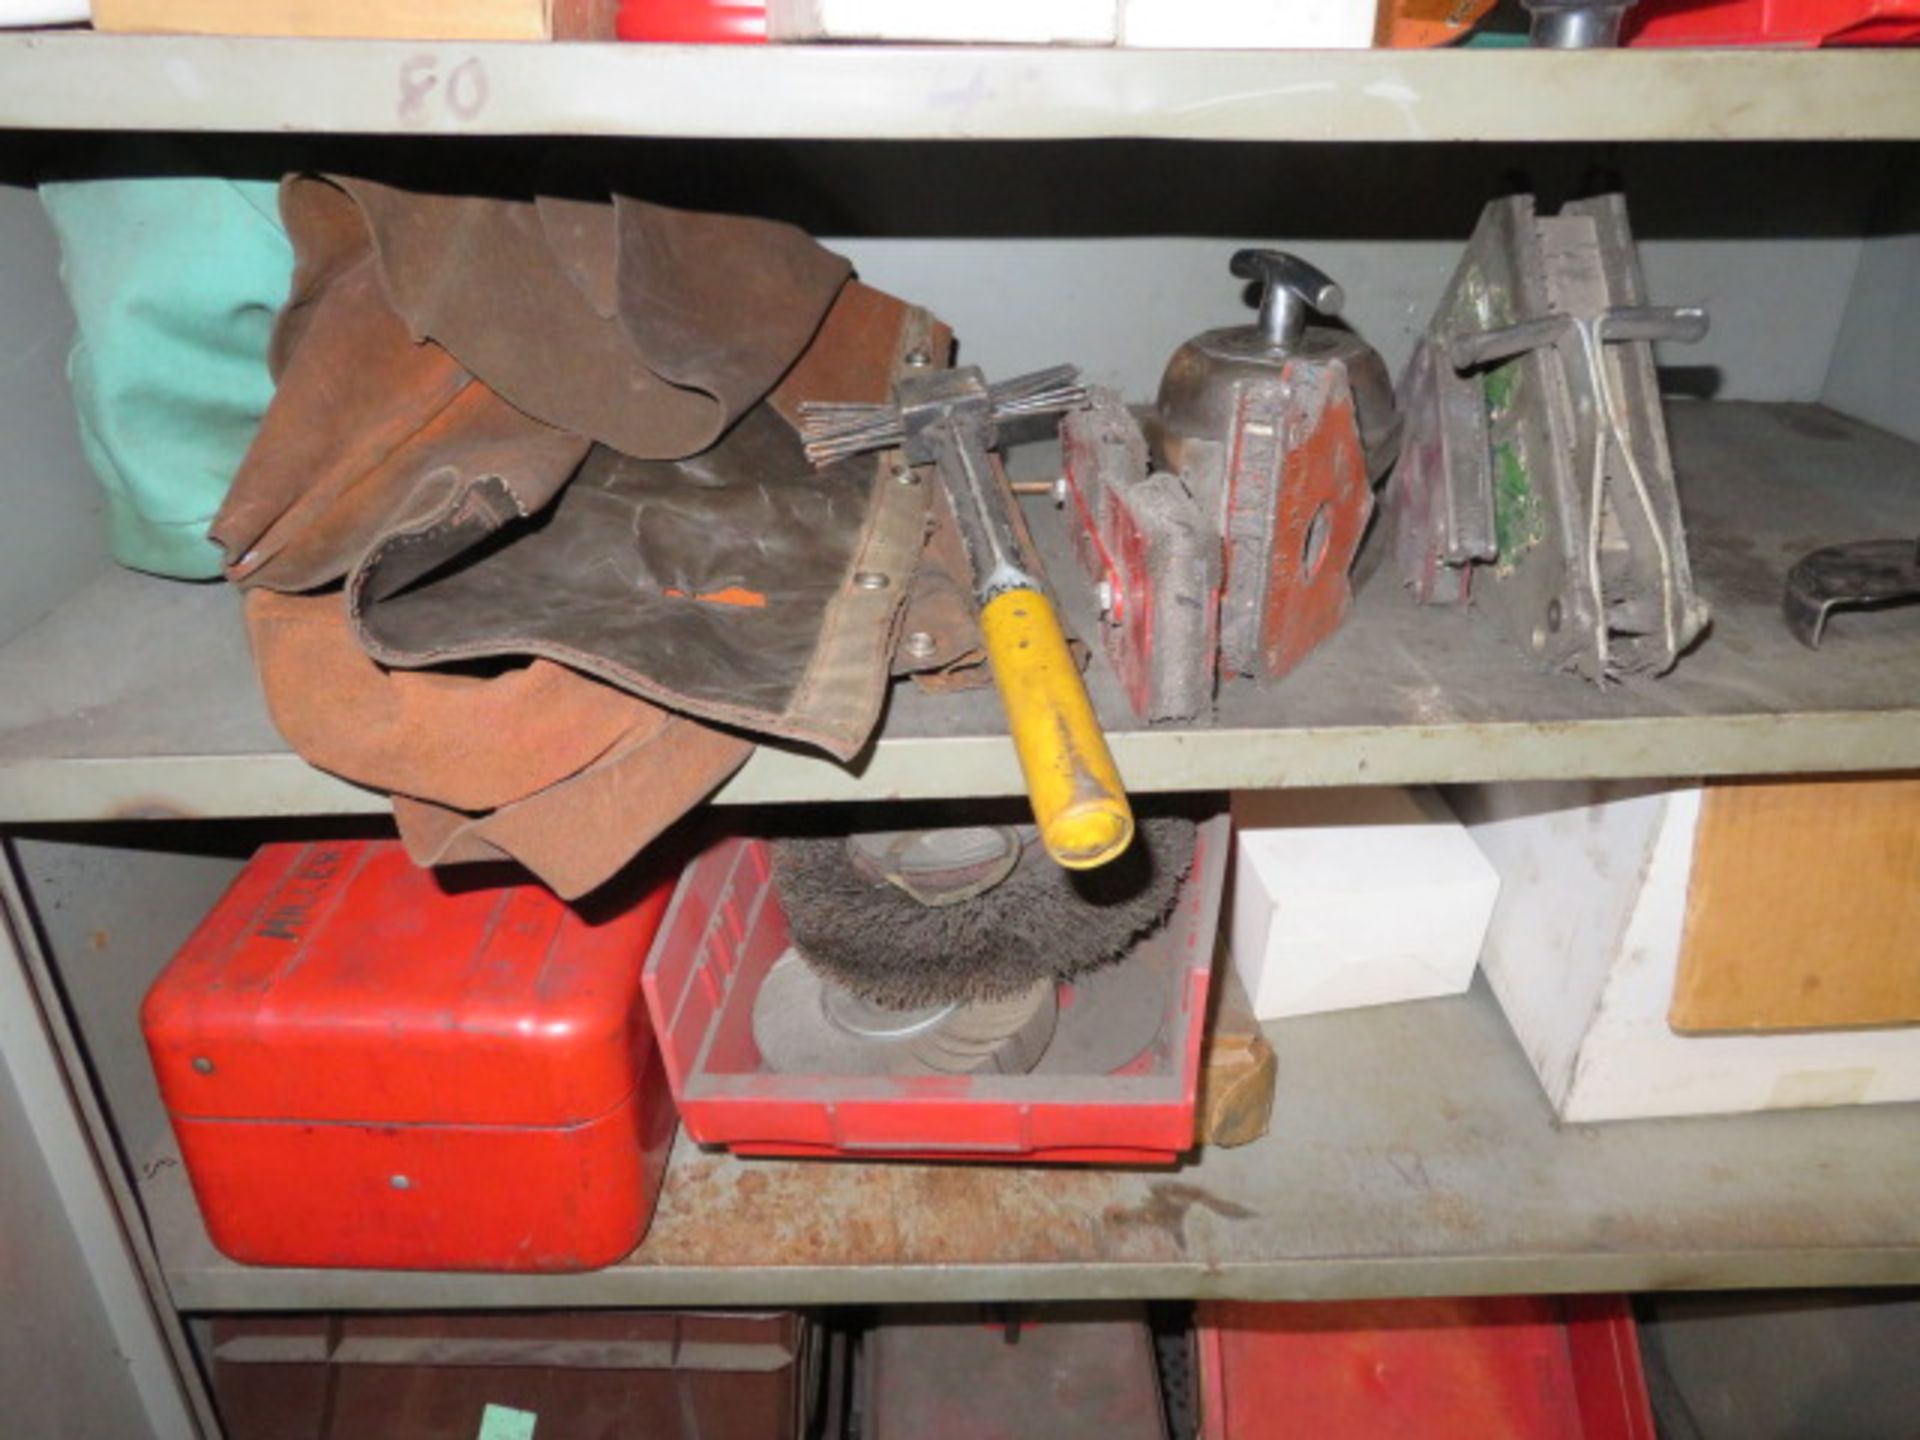 CABINET W/WIRE BRUSHES, WELDING TIPS AND ACCESSORIES - Image 5 of 5